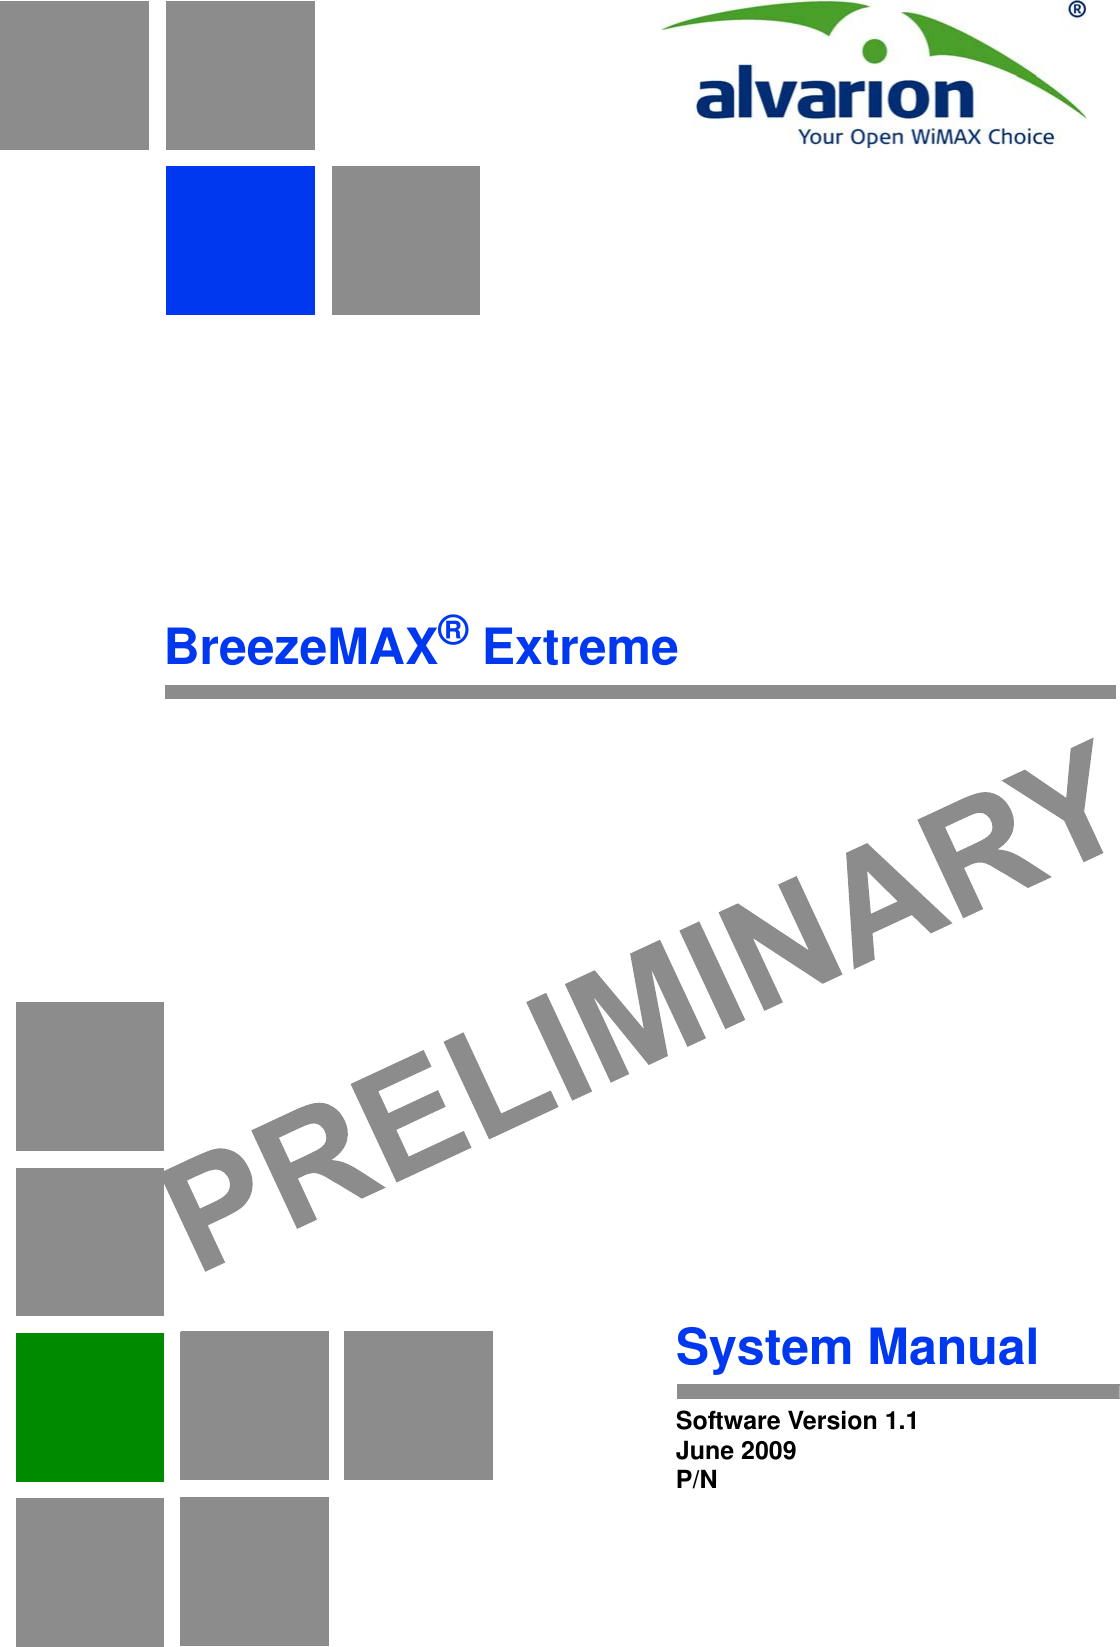 BreezeMAX® ExtremeSystem ManualSoftware Version 1.1June 2009P/N 